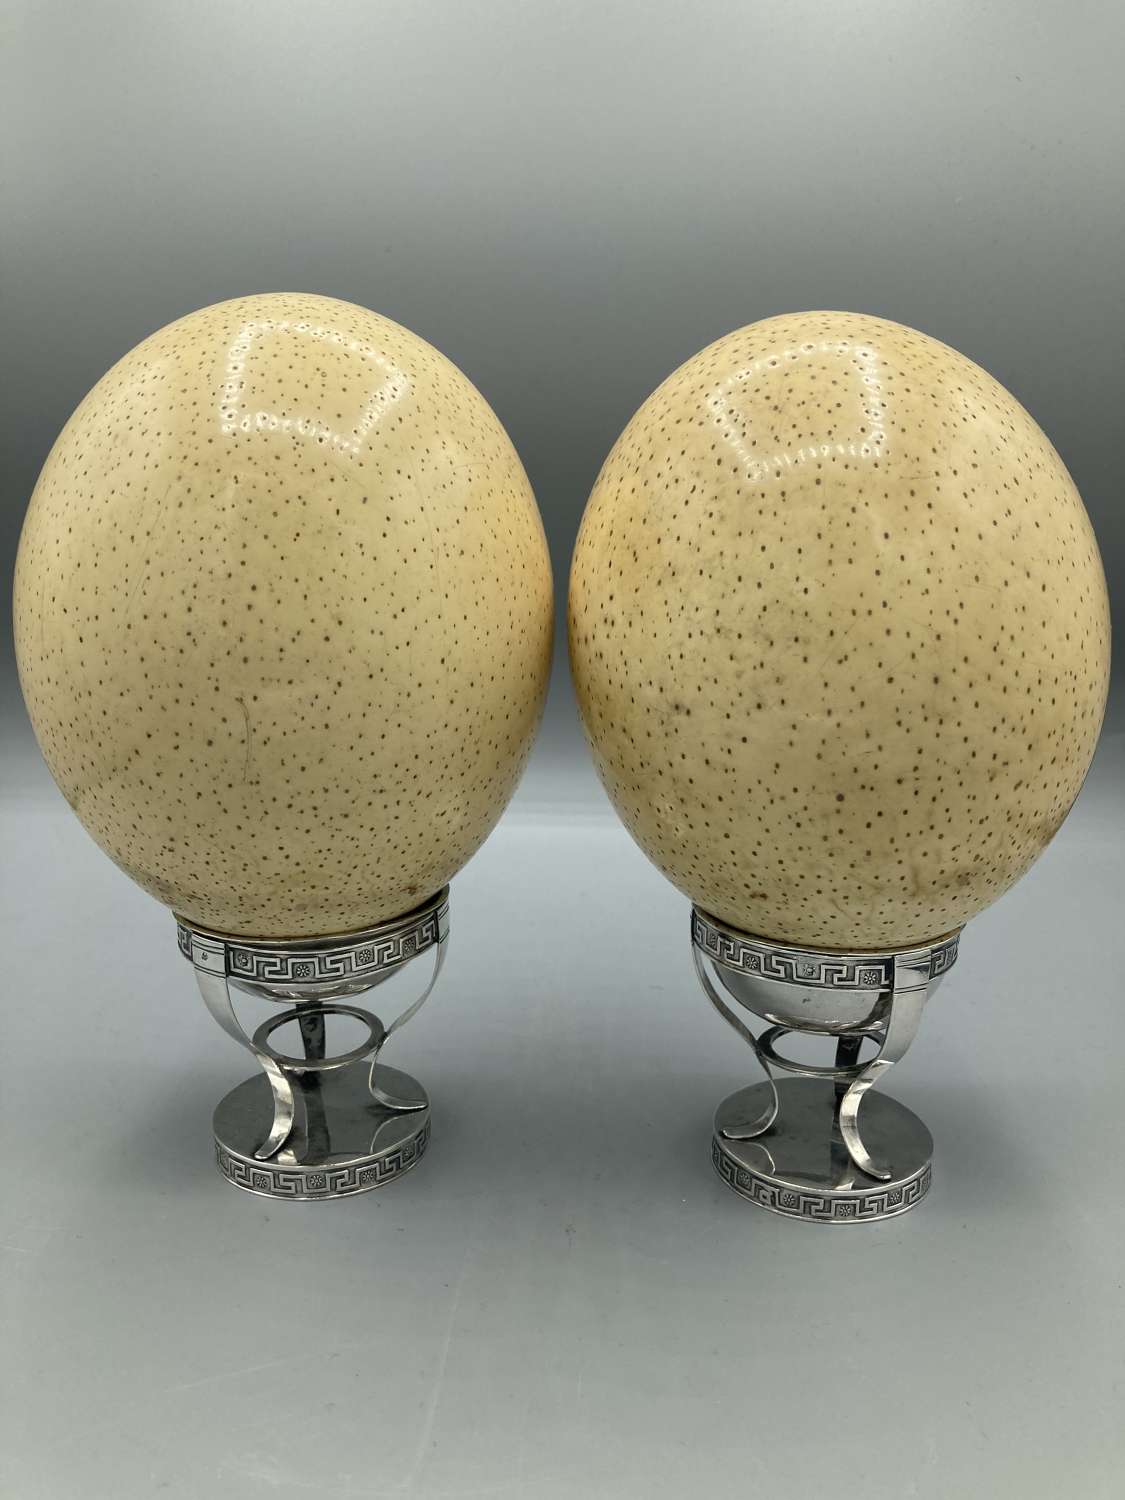 A Pair Of Ostrich Eggs on Italian Silver Stands